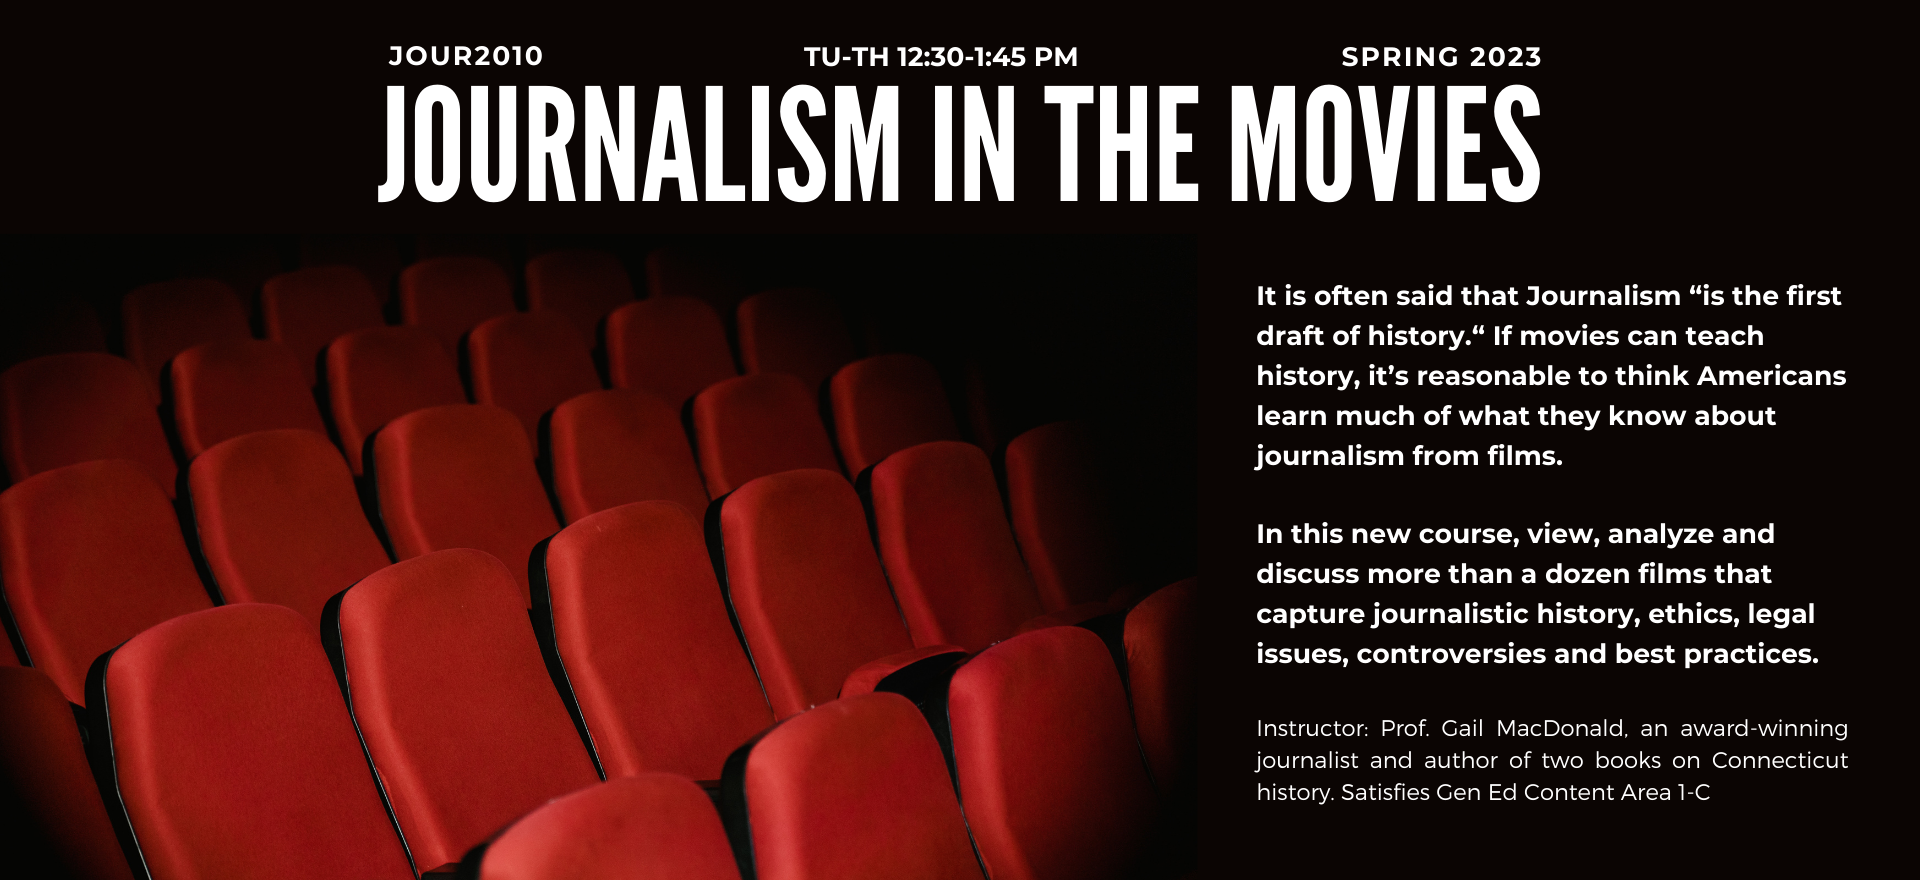 JOURNALISM IN THE MOVIES poster